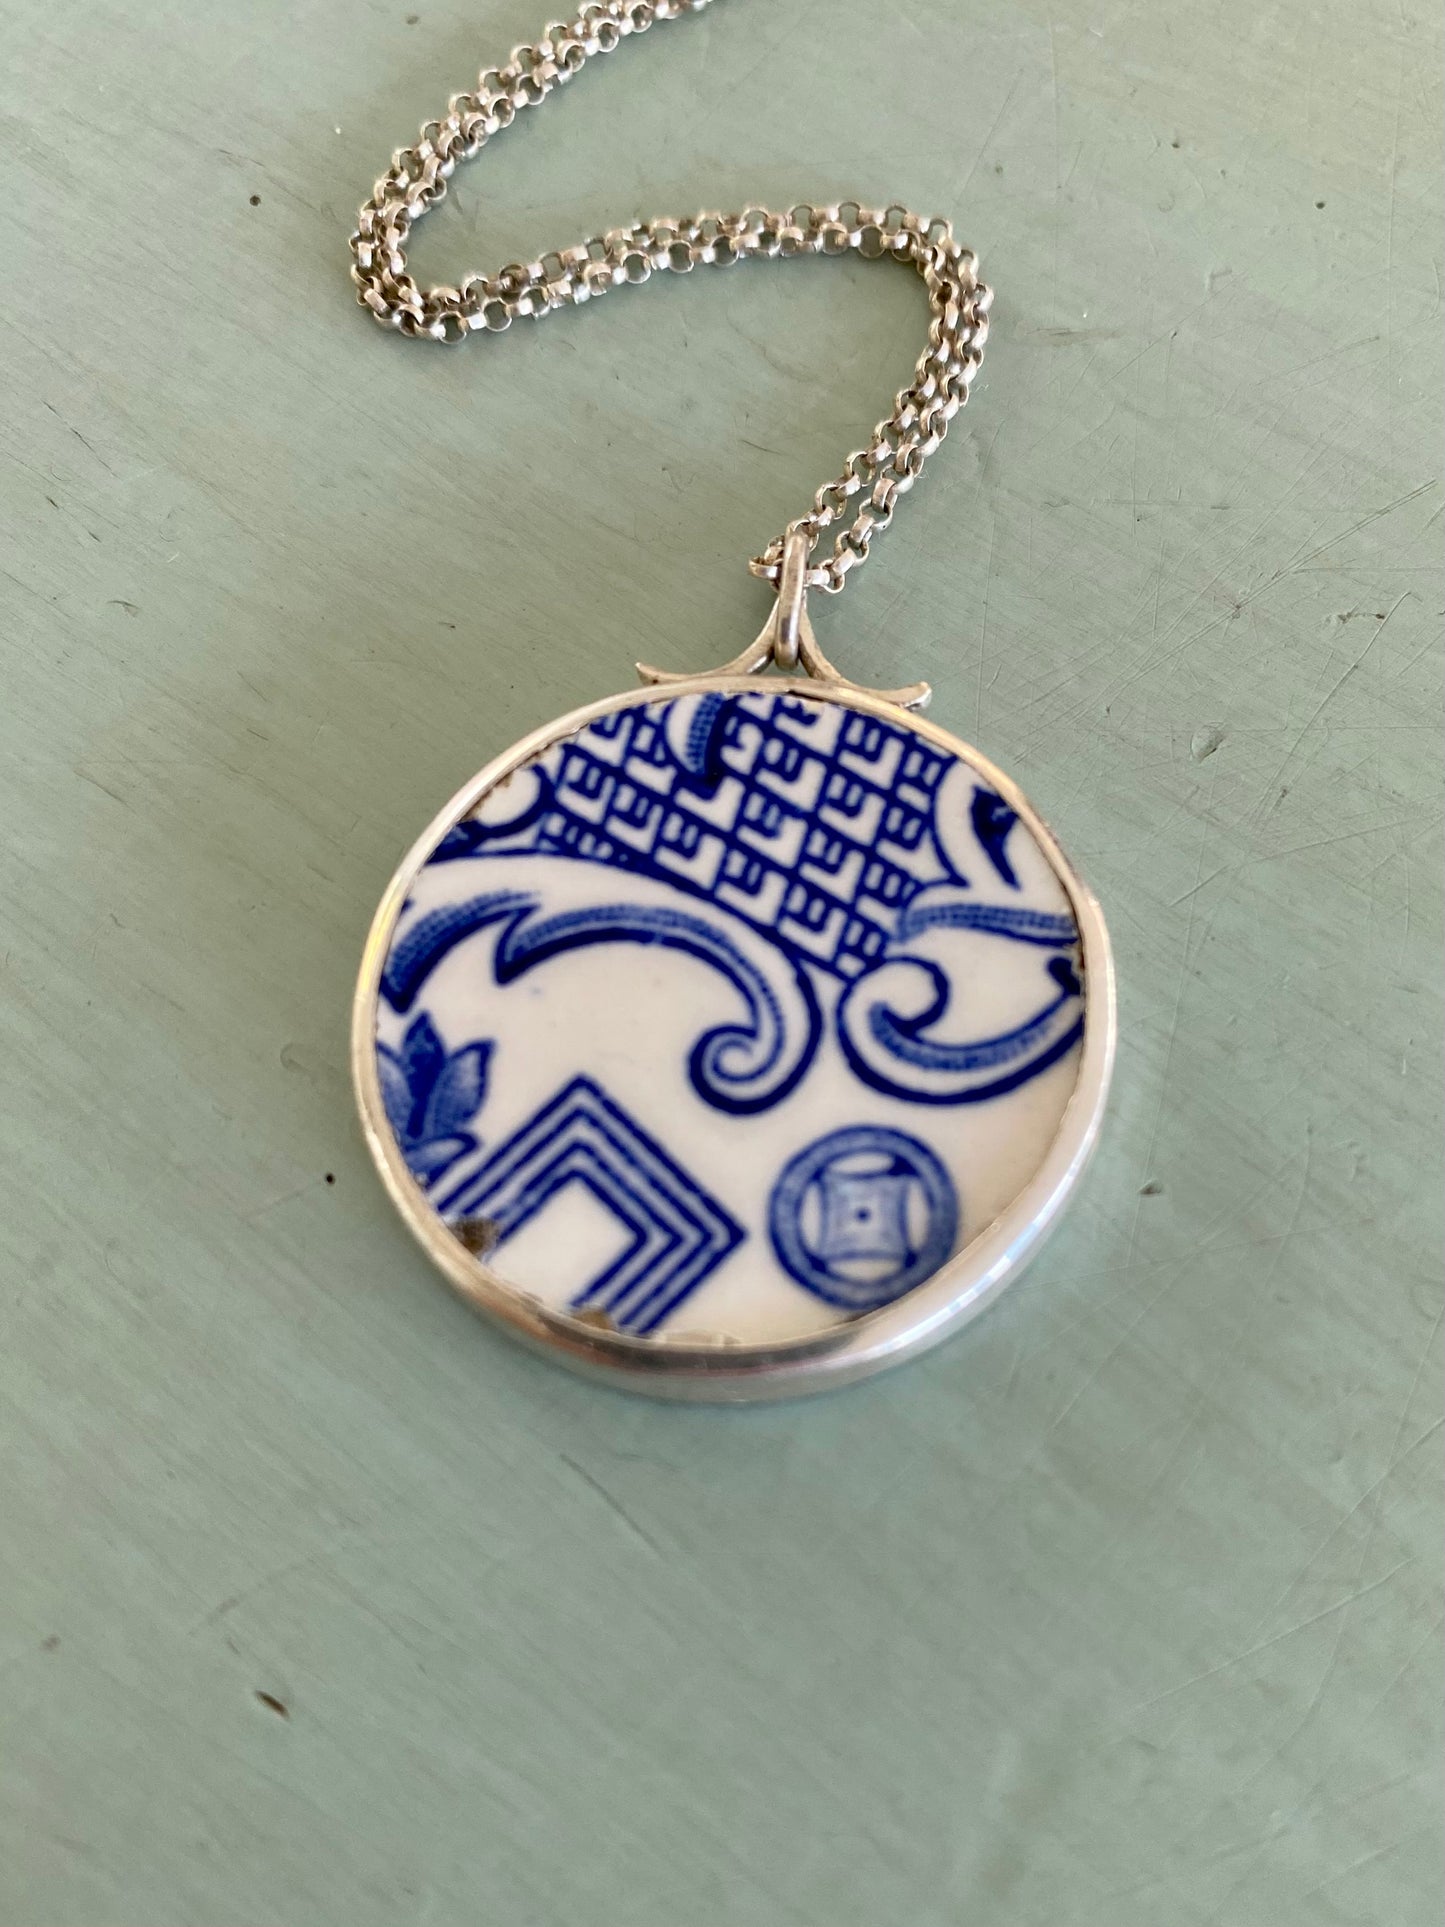 Handcrafted Willow Pattern Ceramic Pendant in Sterling Silver Chain - Front View.